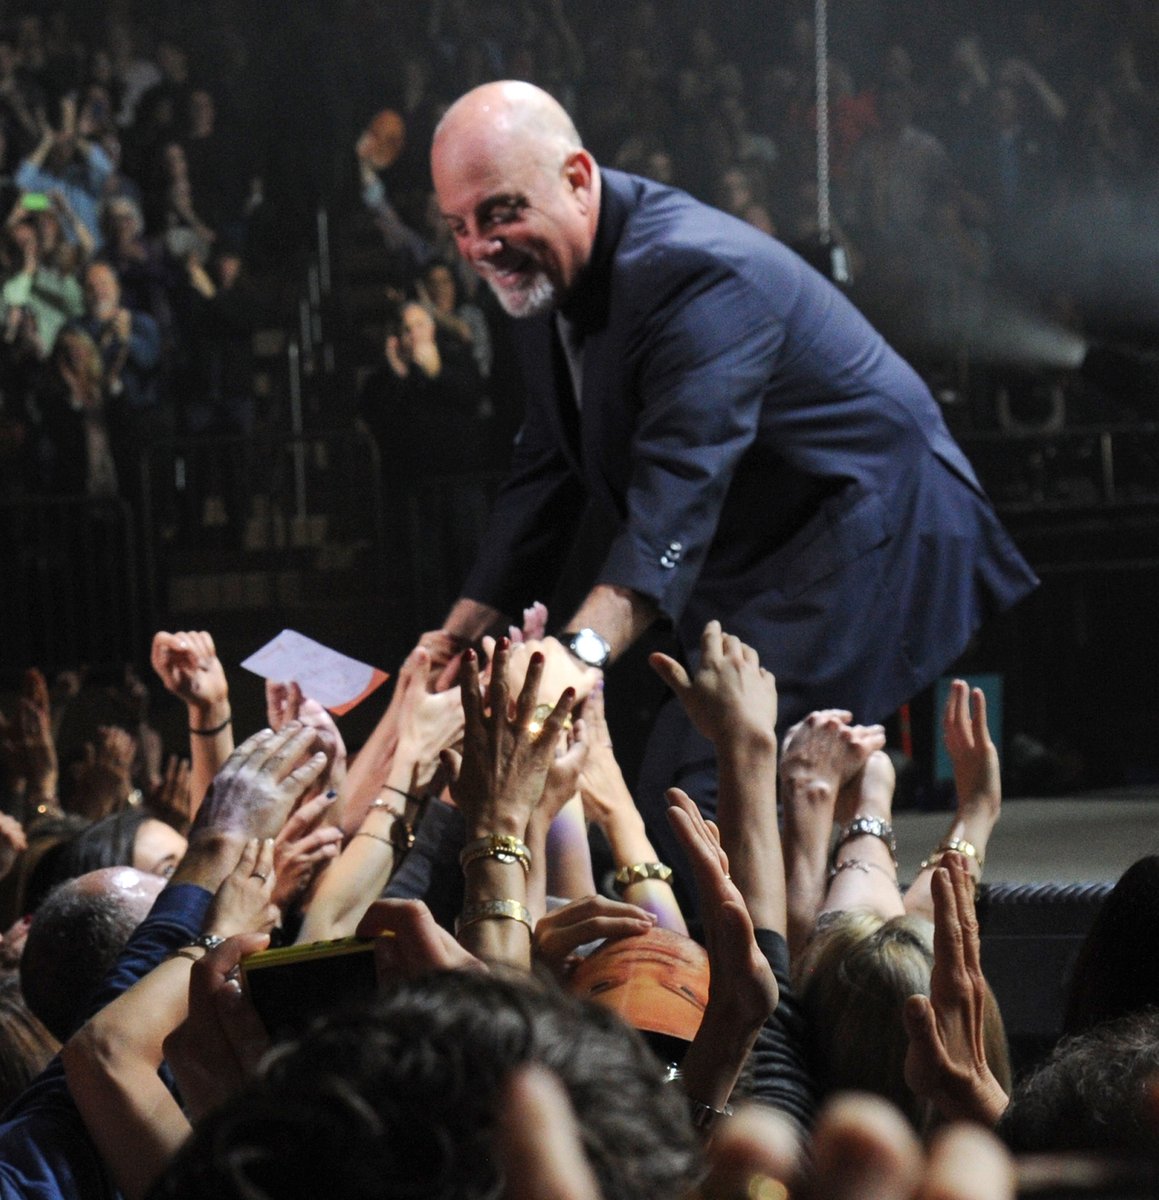 Billy Joel turns 75! Here is Billy 10 years ago celebrating his 65th at Madison Square Garden. (Photo by Kevin Mazur/WireImage) Have you picked up one of #billyjoel’s vinyl boxes yet? Go here: tinyurl.com/4d5w84c5